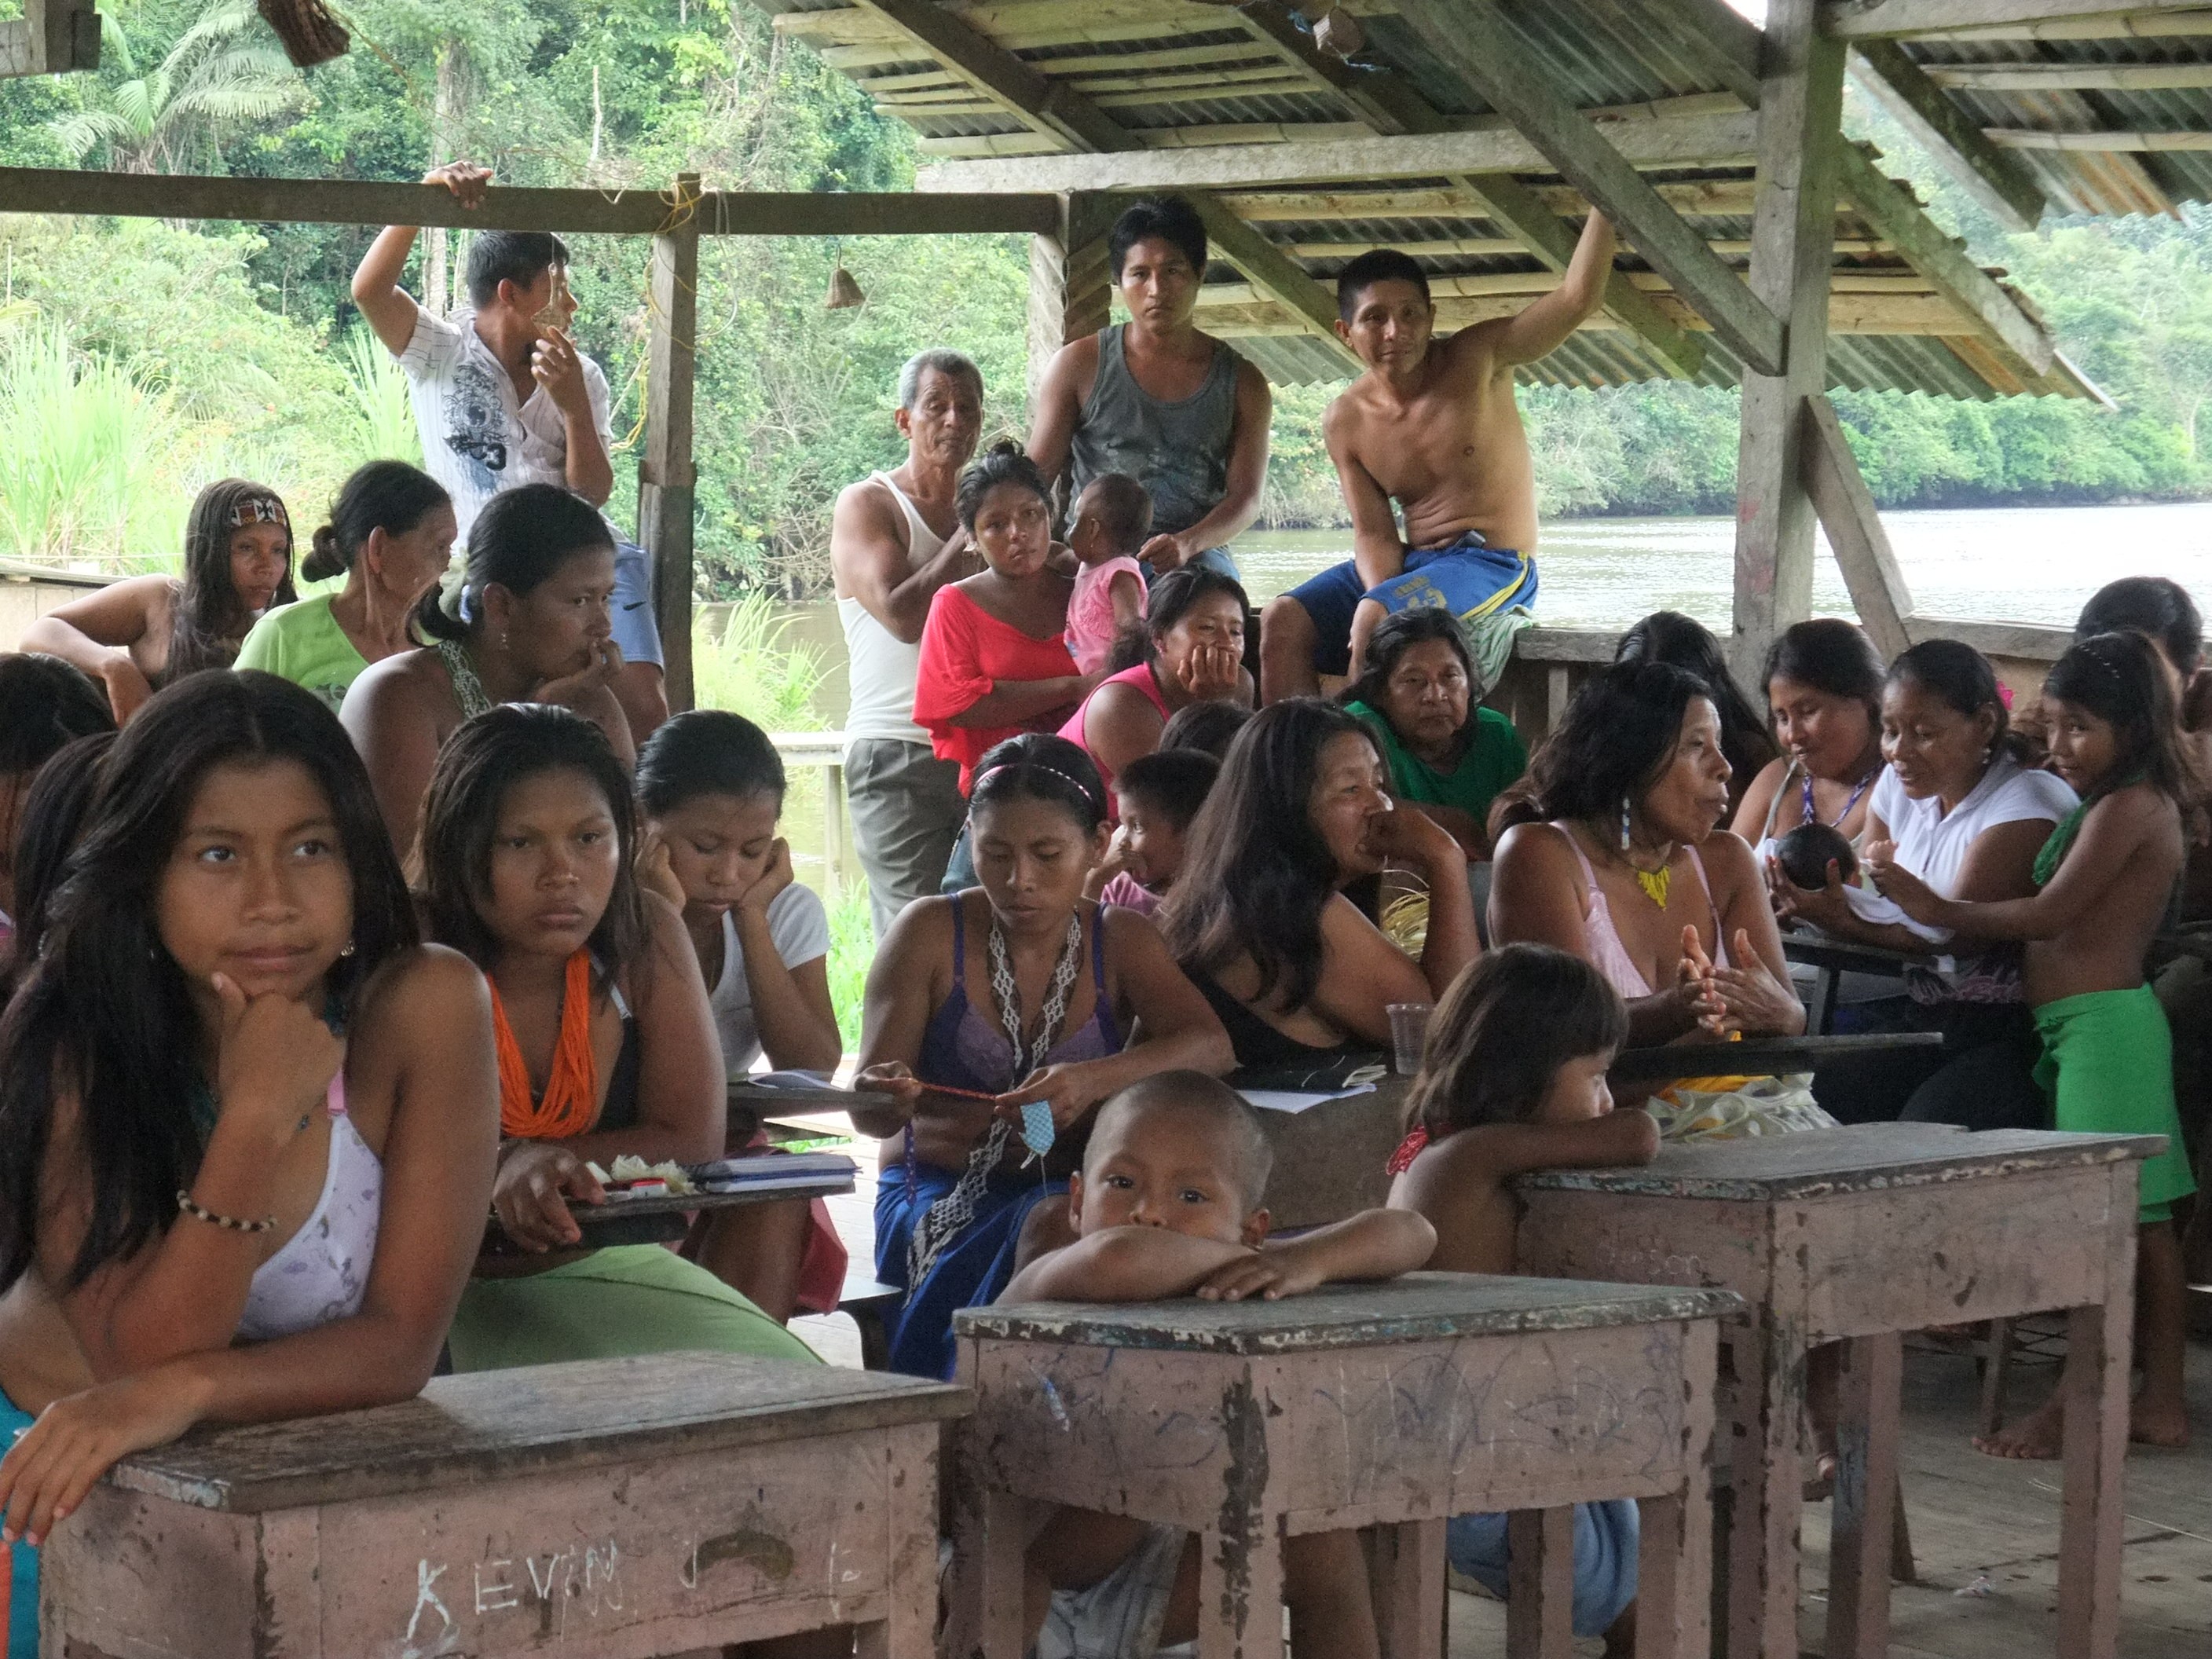 Indigenous women in Colombia-Ecuador border are leading community